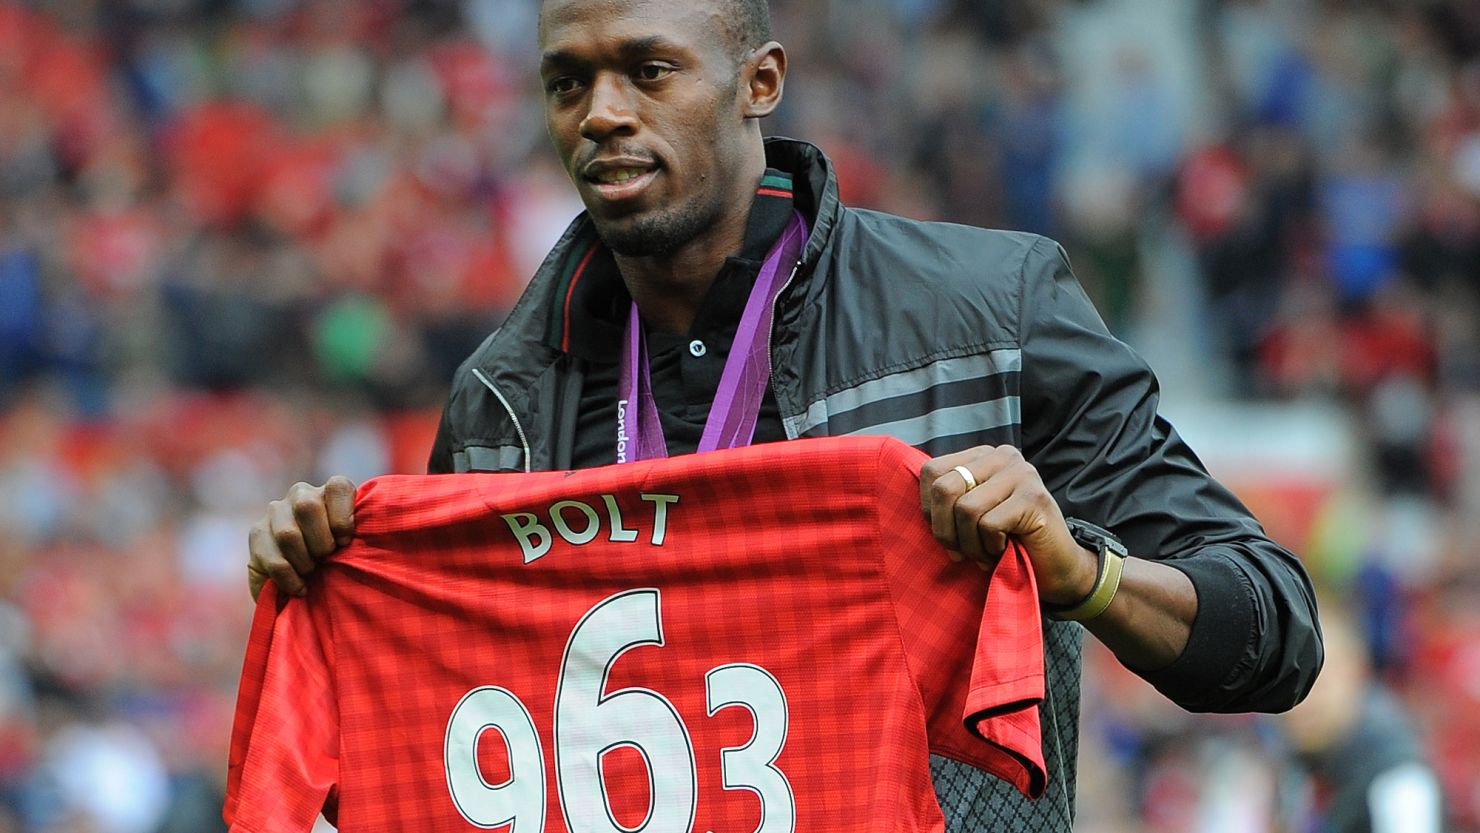 Usain Bolt shows off a special Manchester United shirt bearing his winning time in the 2012 Olympic 100m final.